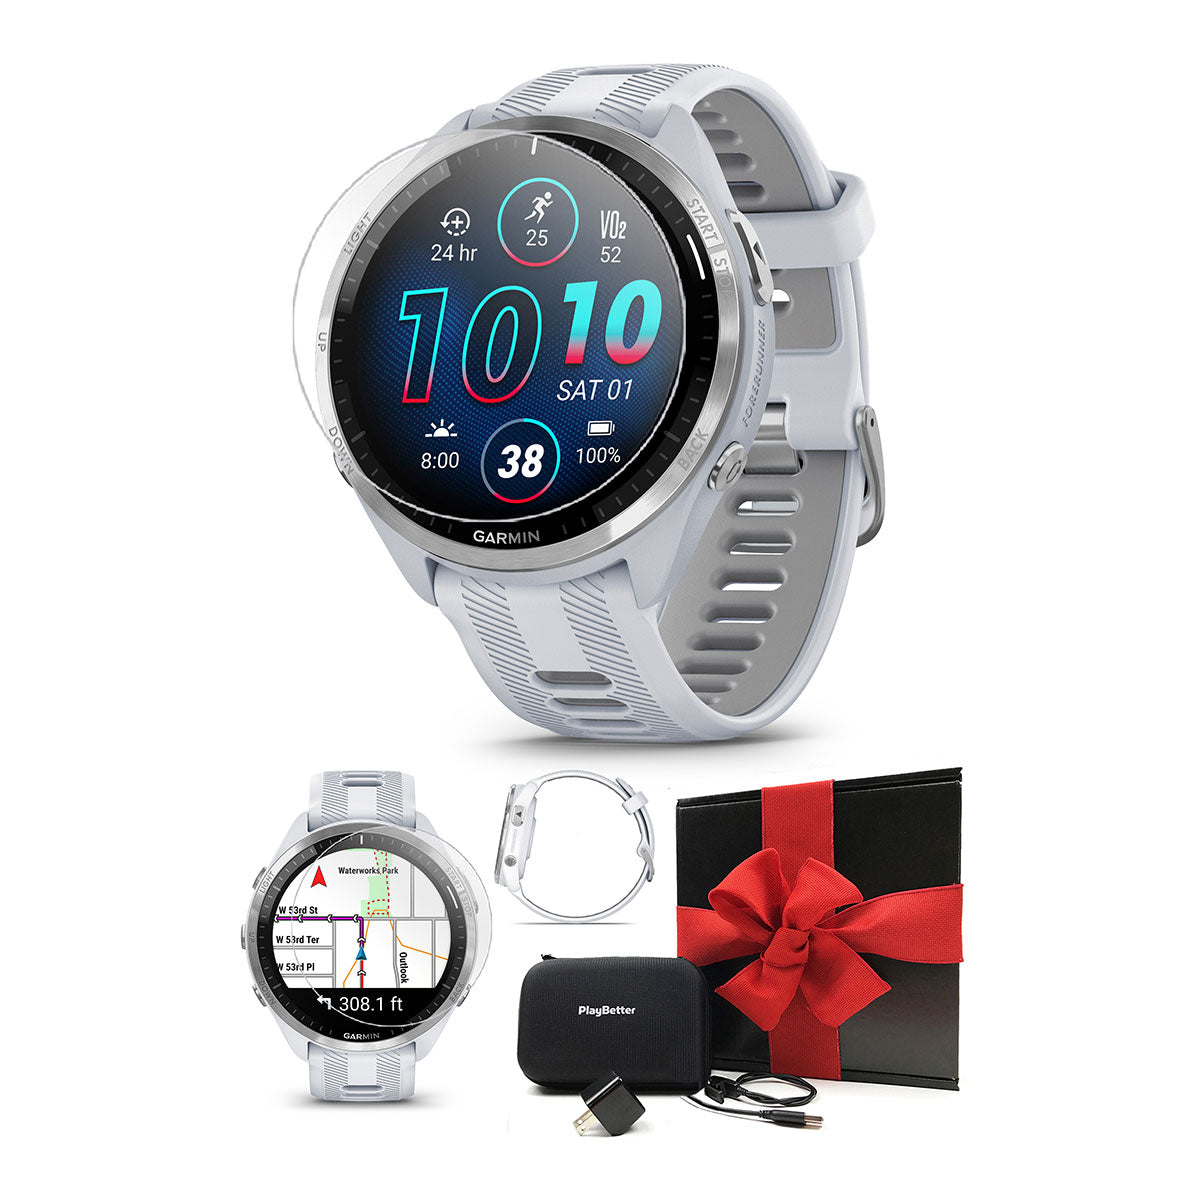 Garmin Forerunner 965 (Whitestone) Premium Running GPS Smartwatch | Gift Box with PlayBetter HD Screen Protectors, Wall Adapter & Case - image 1 of 7